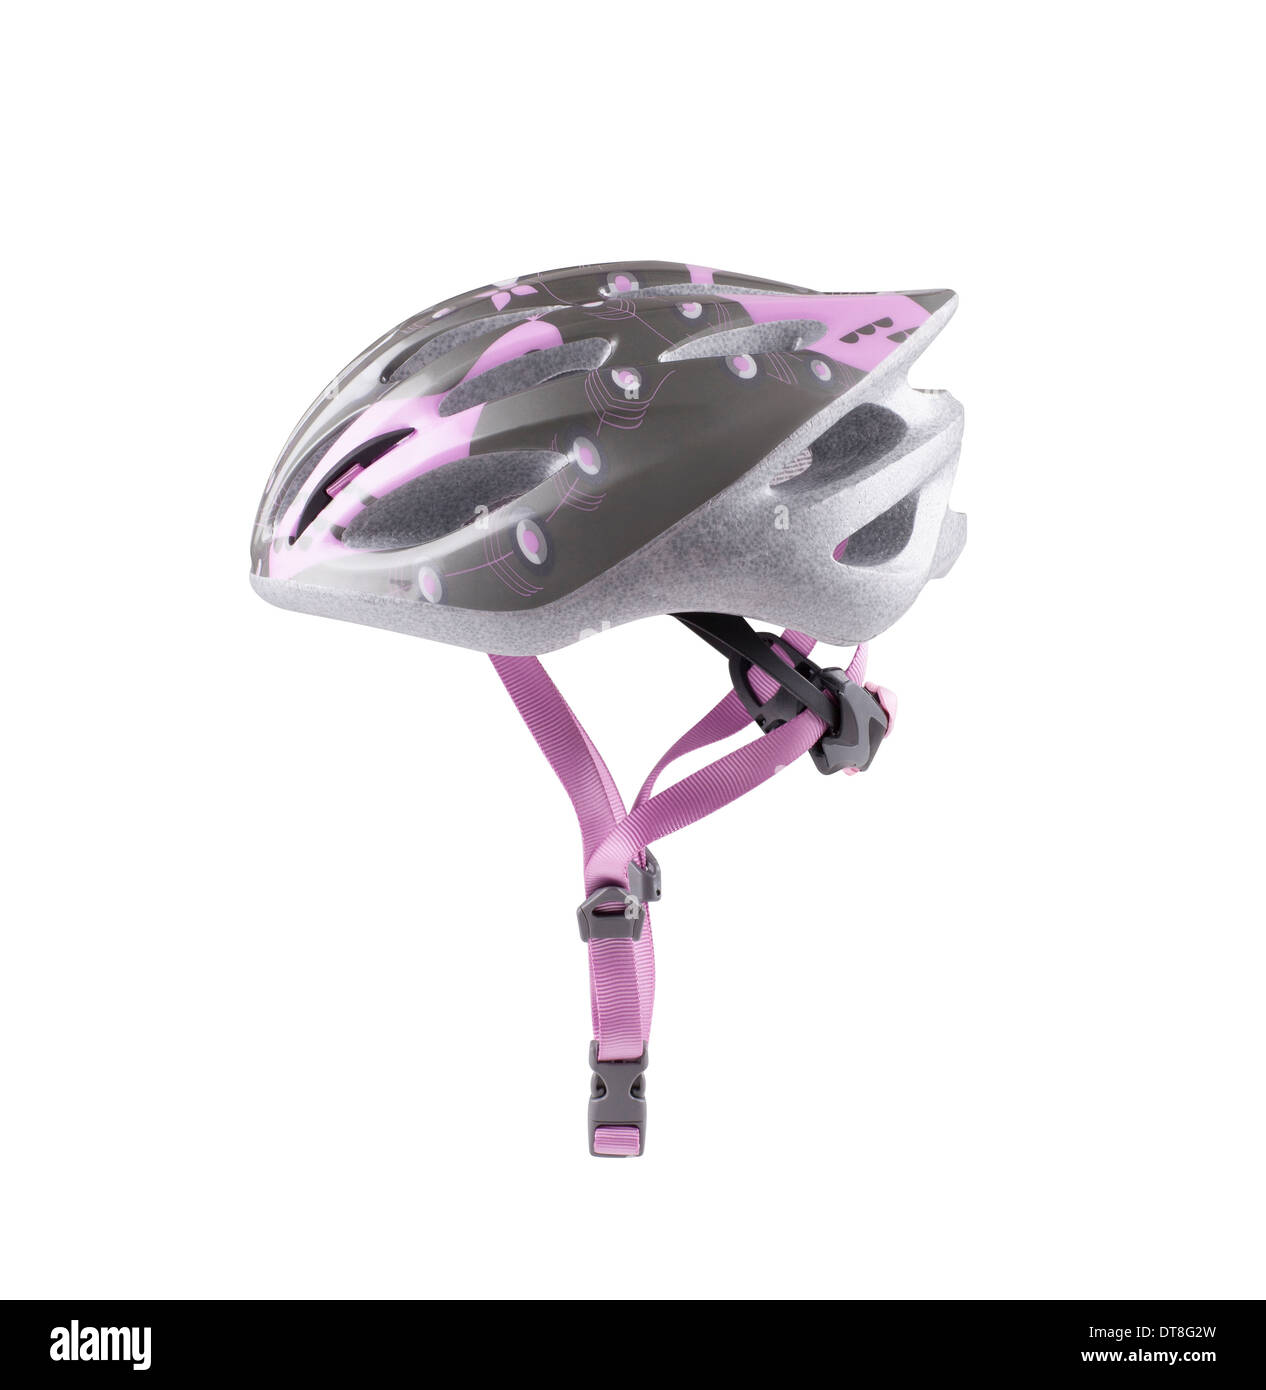 woman bicycle mountain bike safety helmet isolated on white background Stock Photo